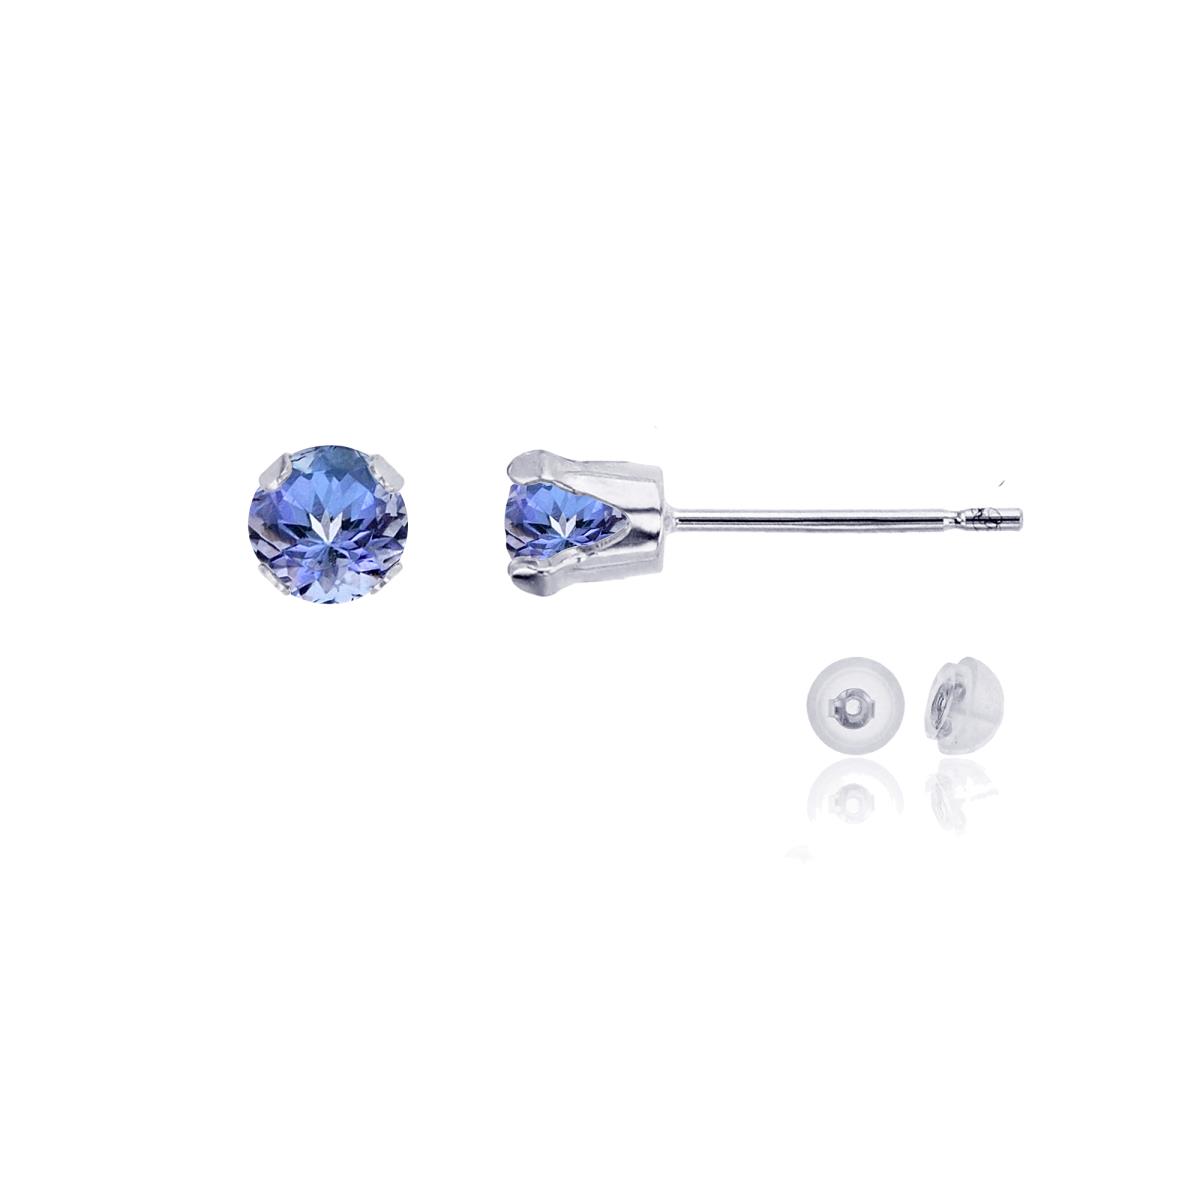 10K White Gold 4mm Round Tanzanite Stud Earring with Silicone Back